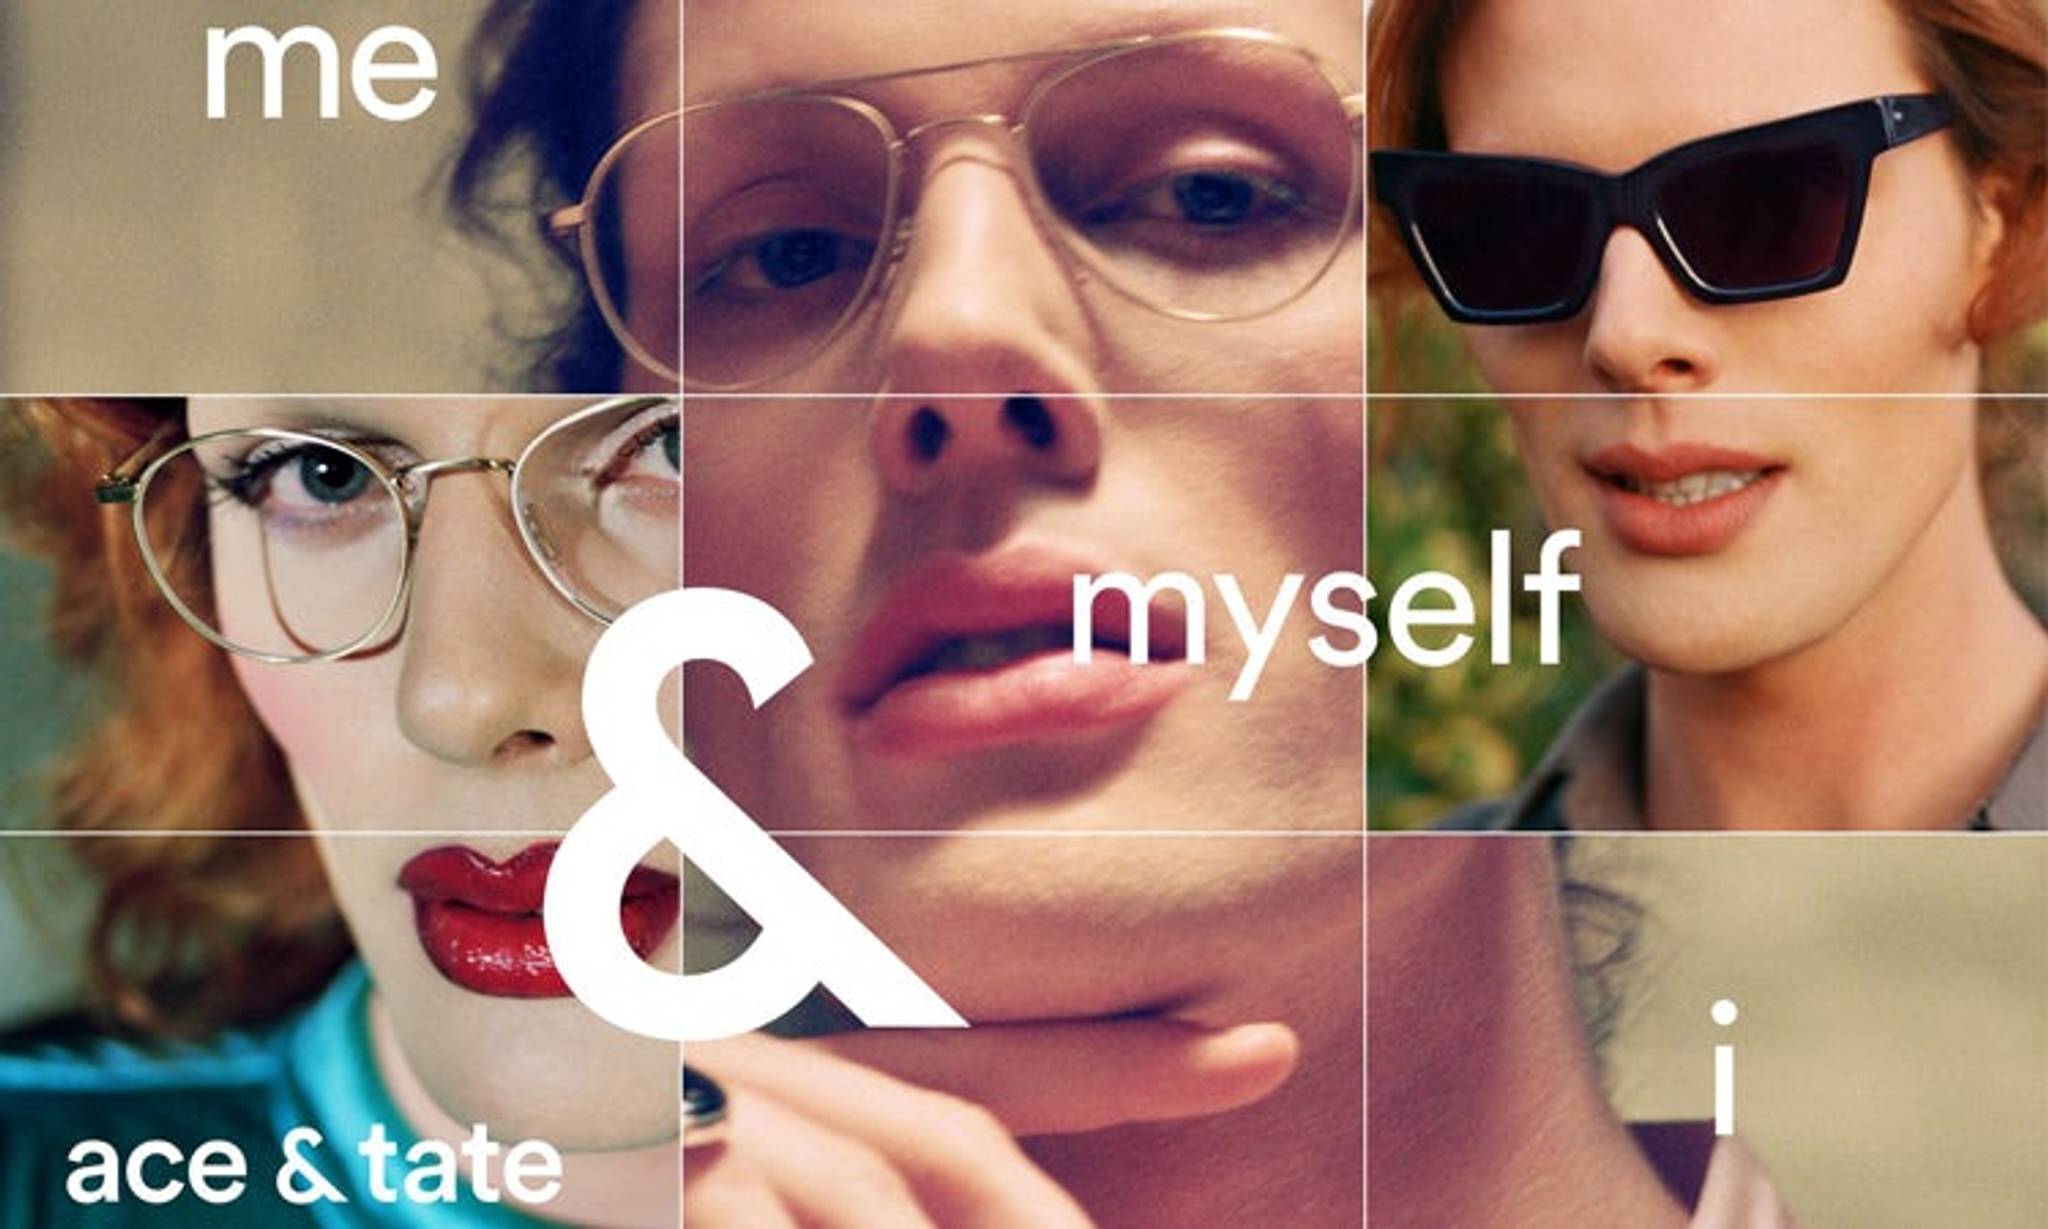 Ace & Tate helps glasses wearers express themselves